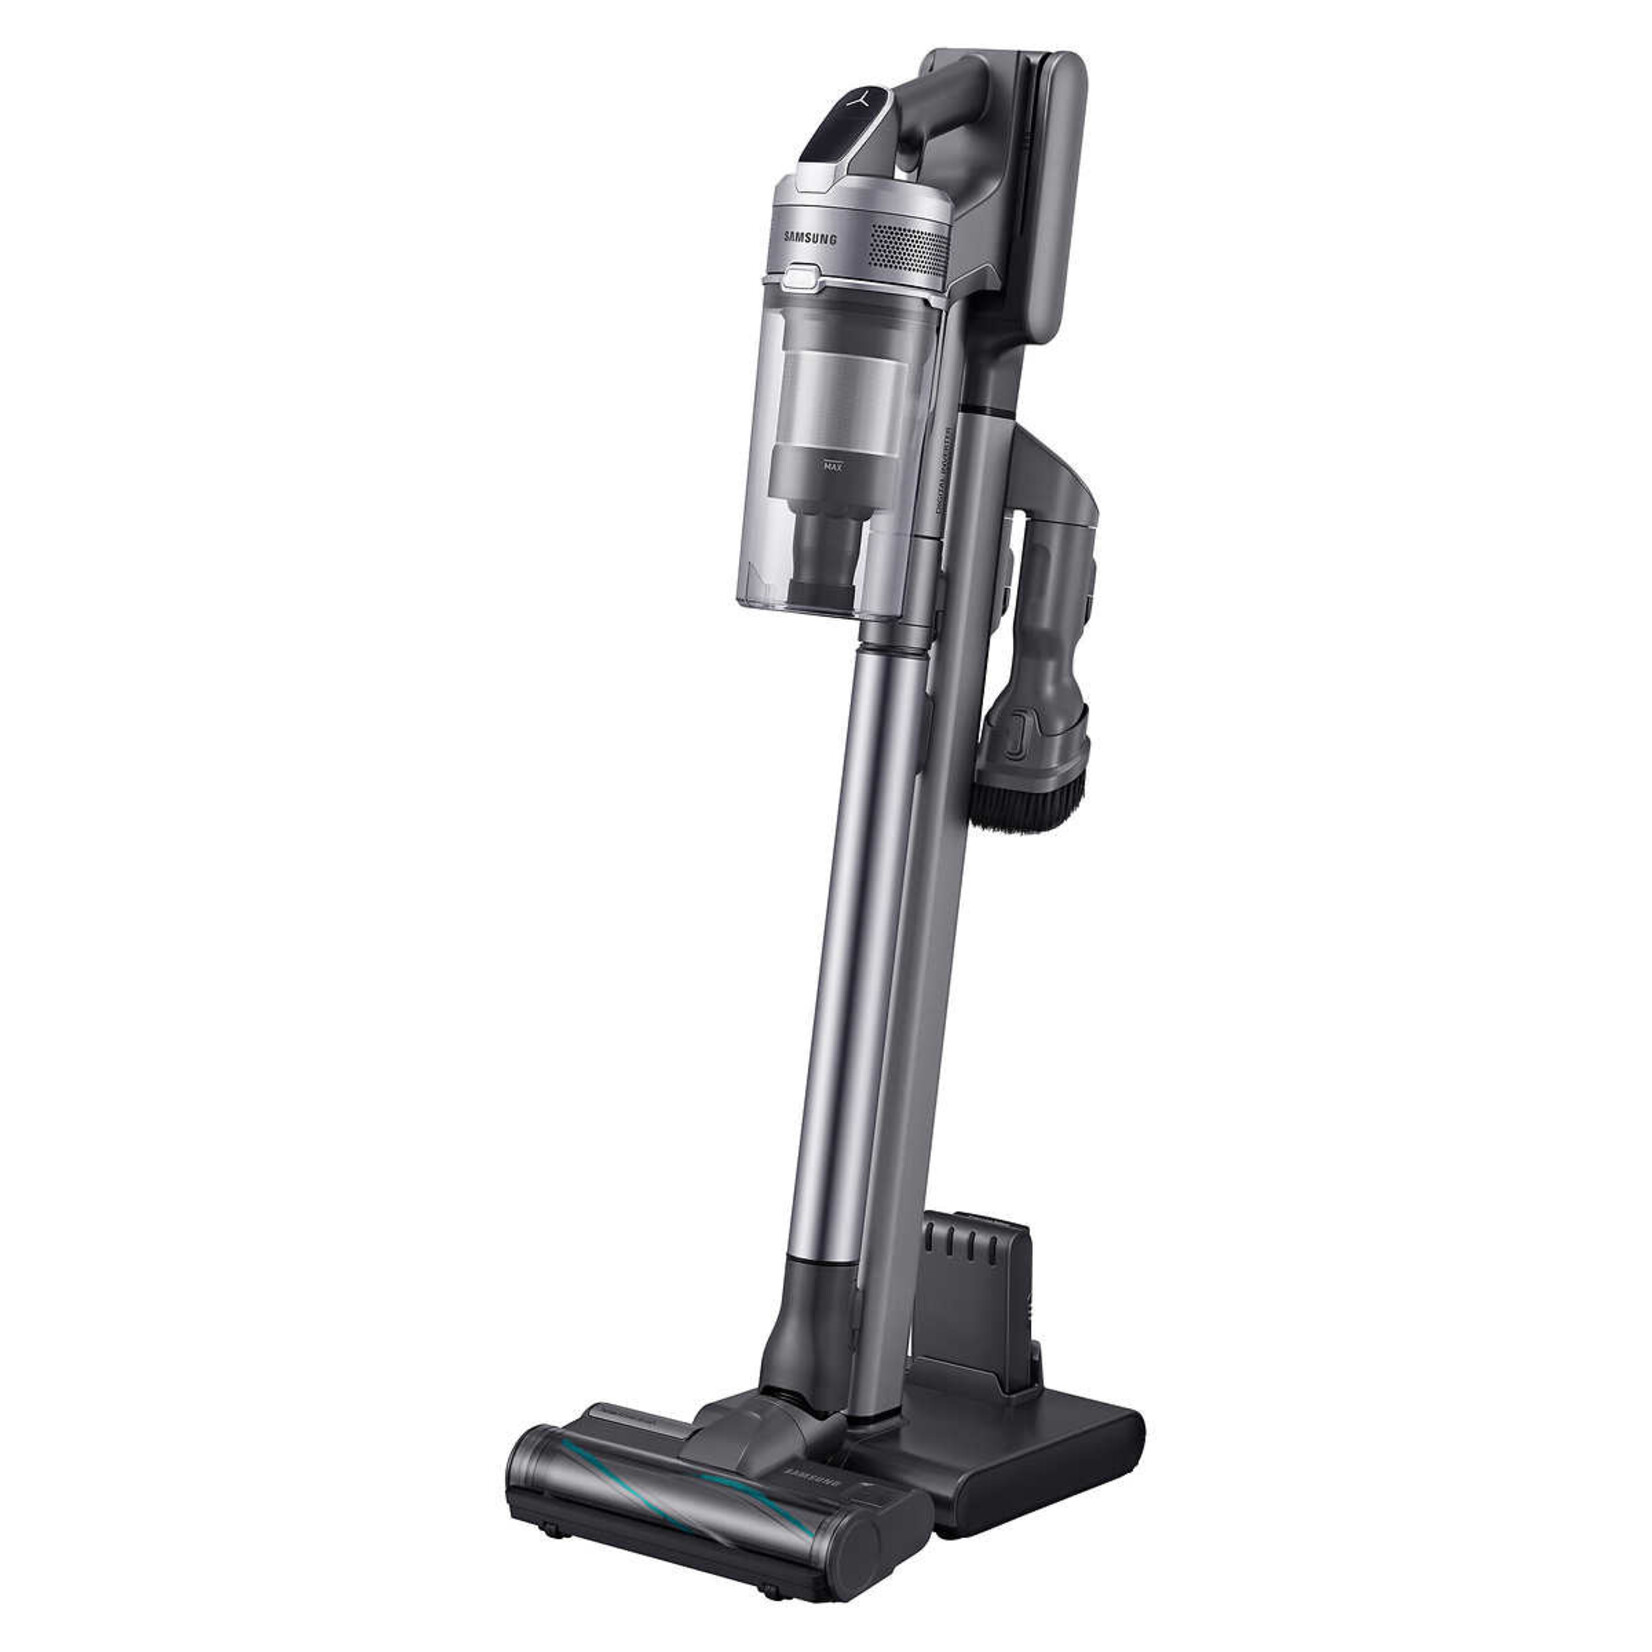 Opened - Samsung Jet90 Ultimate Stick Vacuum with Extra Battery